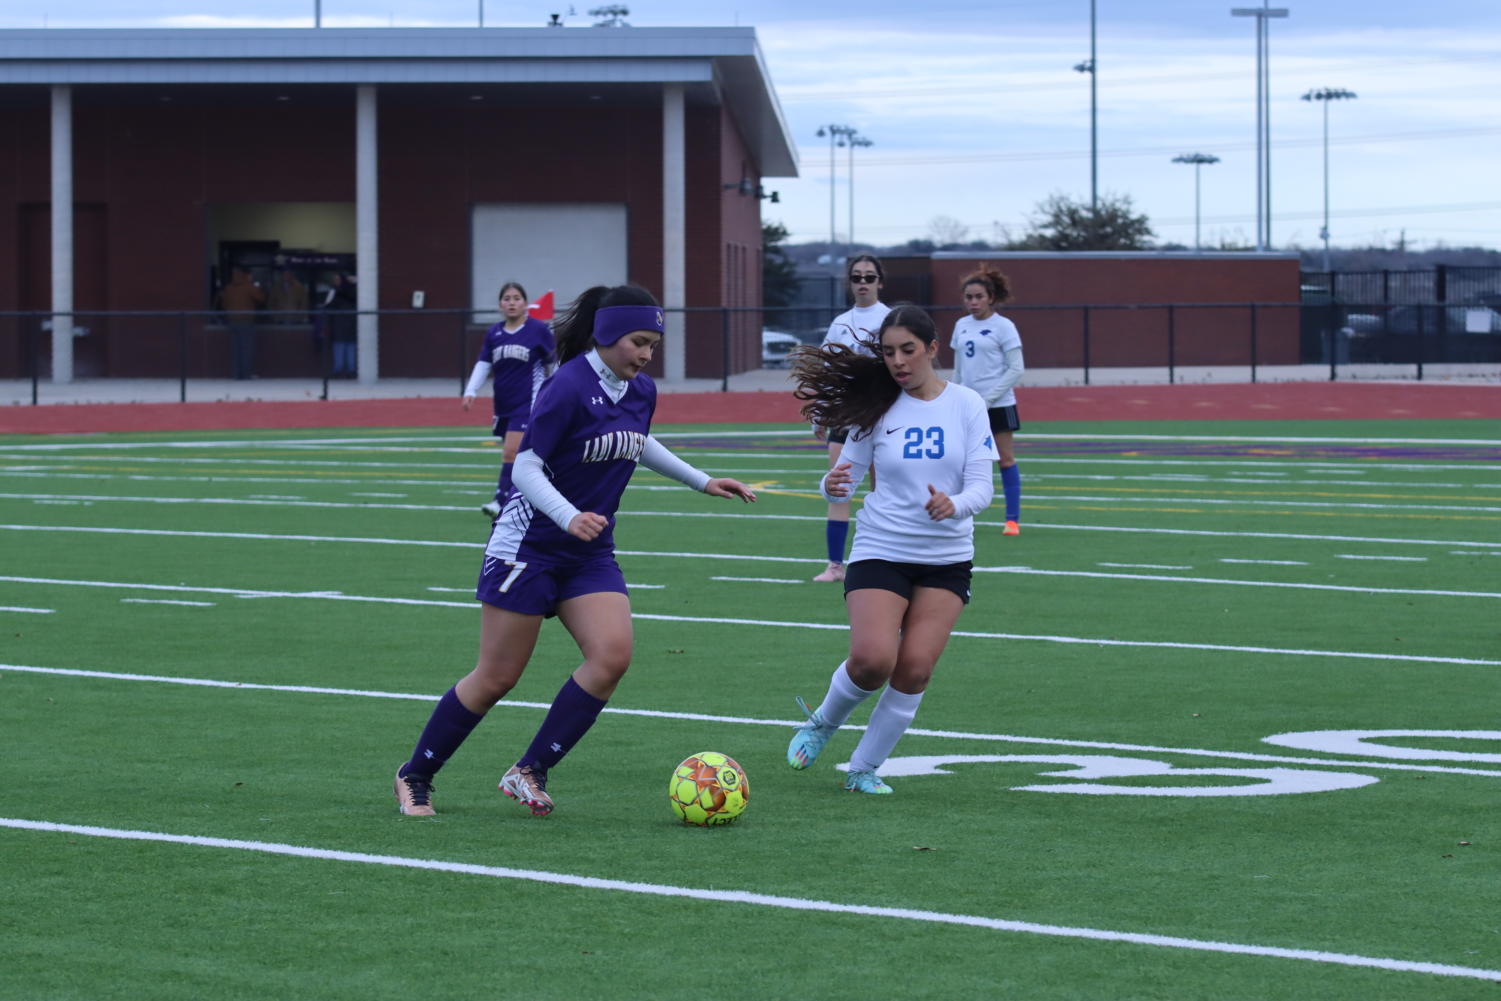 ON THE MOVE During the second half of the game, Marianna Benavente, 9, takes back possession of the ball to pass it to her teammate on Friday, Feb. 10, at the Chisholm Trail field. Photo by Julissa Munoz, 11